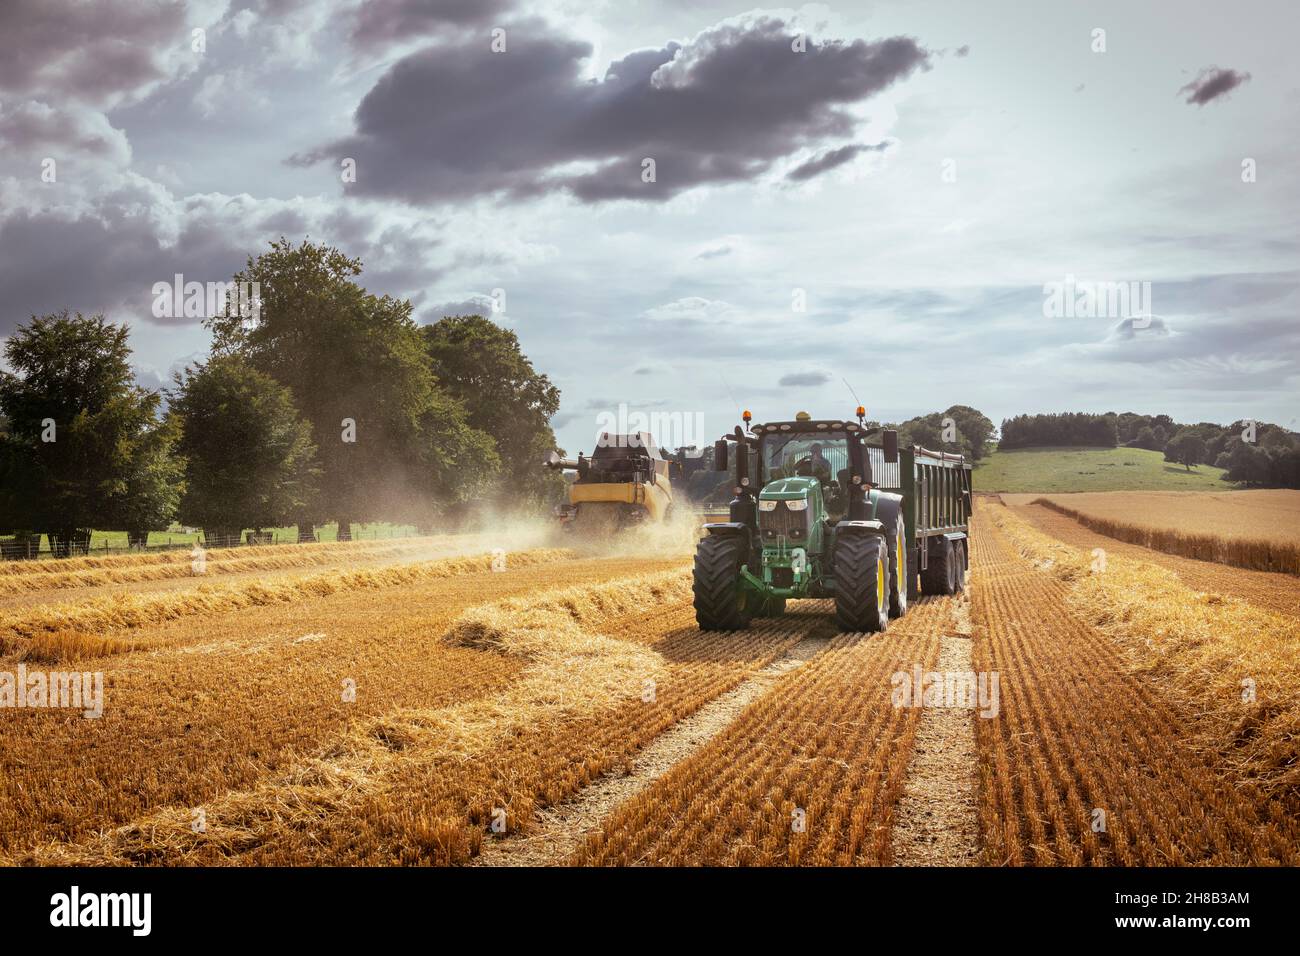 Tractor and combine harvester in field Stock Photo